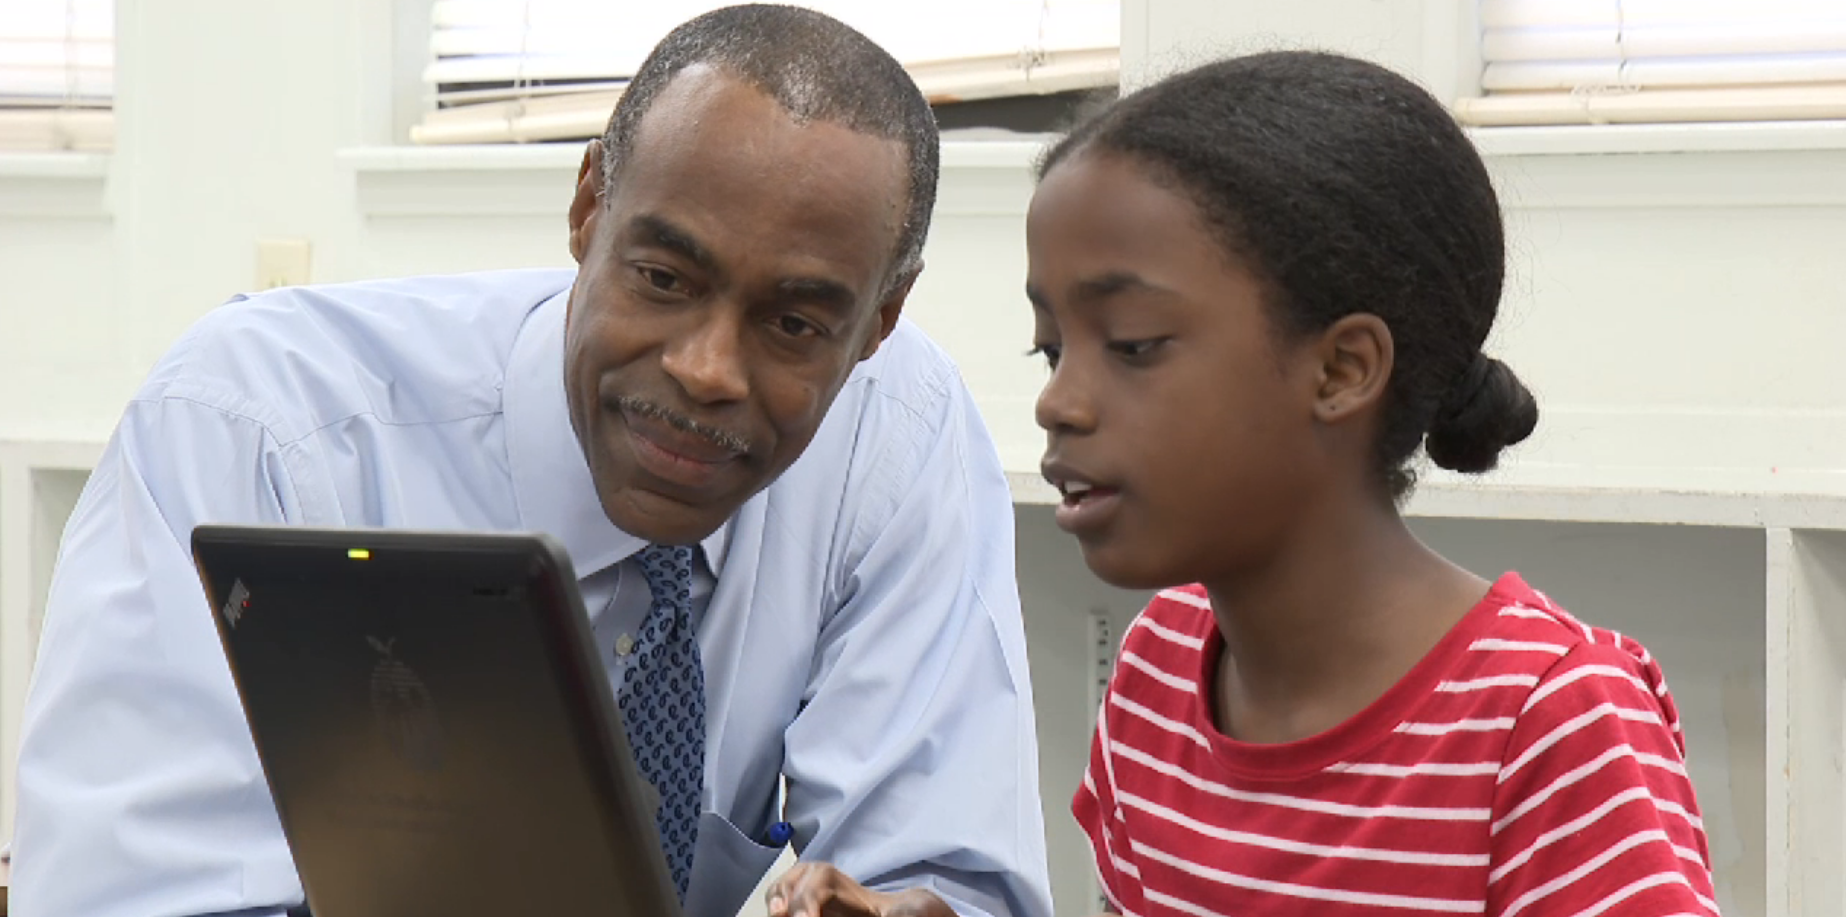 Middle school girl in red shirt with white stripes and male educator looking at a laptop screen. Both are African American.